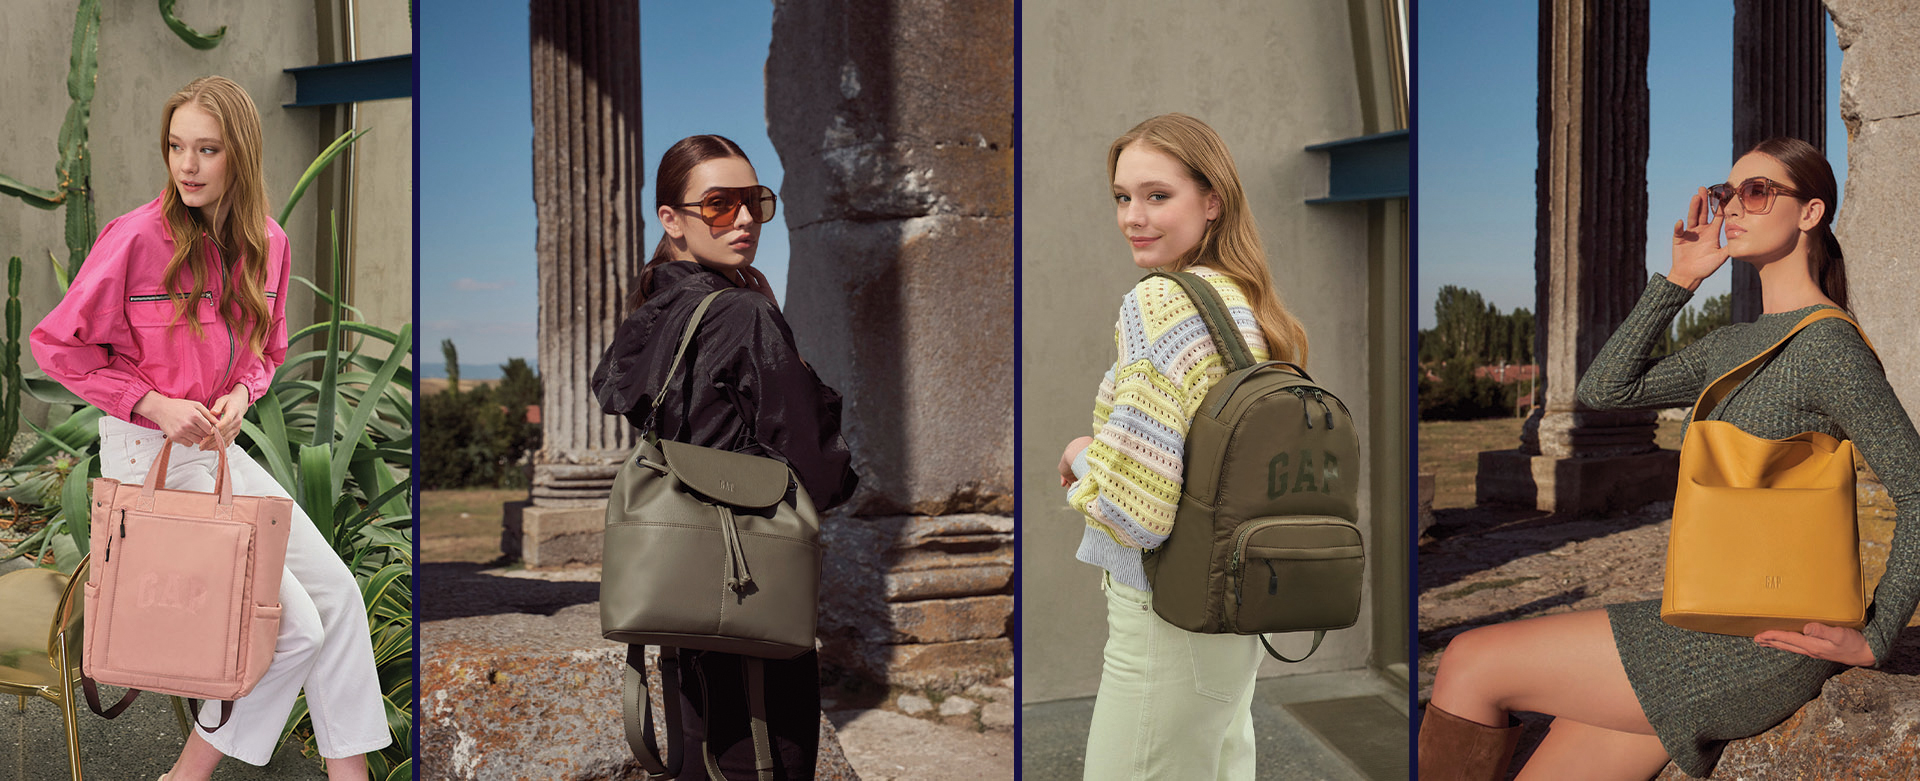 Over-Q launches one of the world's most iconic American Style apparel and accessories brand GAP’s bags.